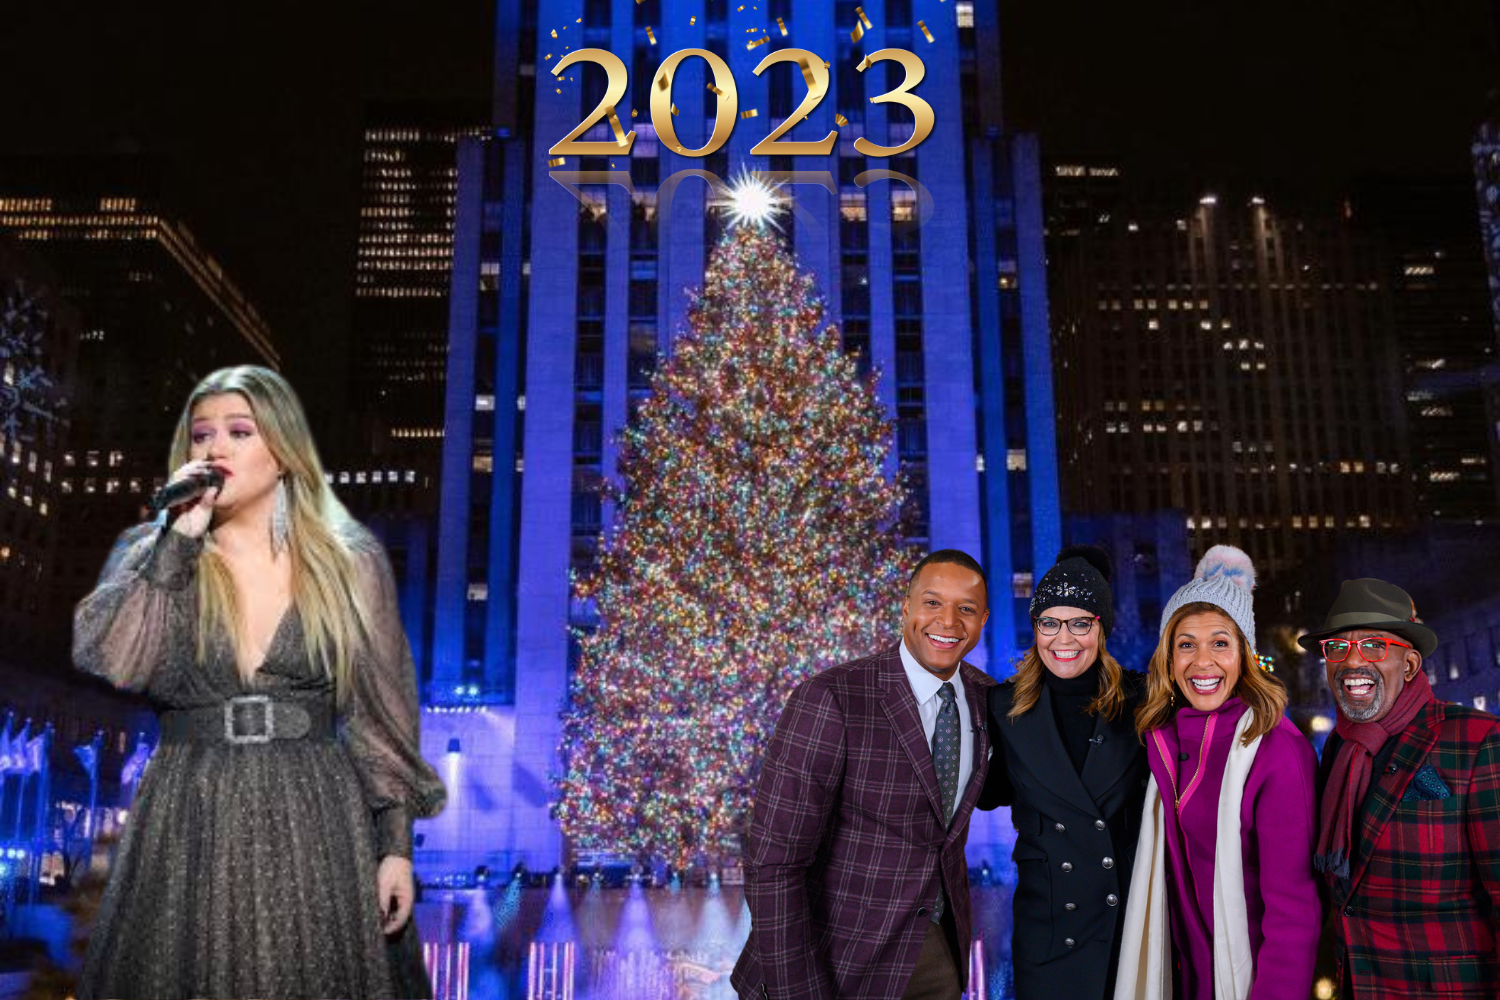 The annual lighting ceremony for this year’s Rockefeller Christmas tree will be held on November 29, 2023. For those who would like to watch, the tree lighting ceremony will be streaming on NBC and Peacock. 
